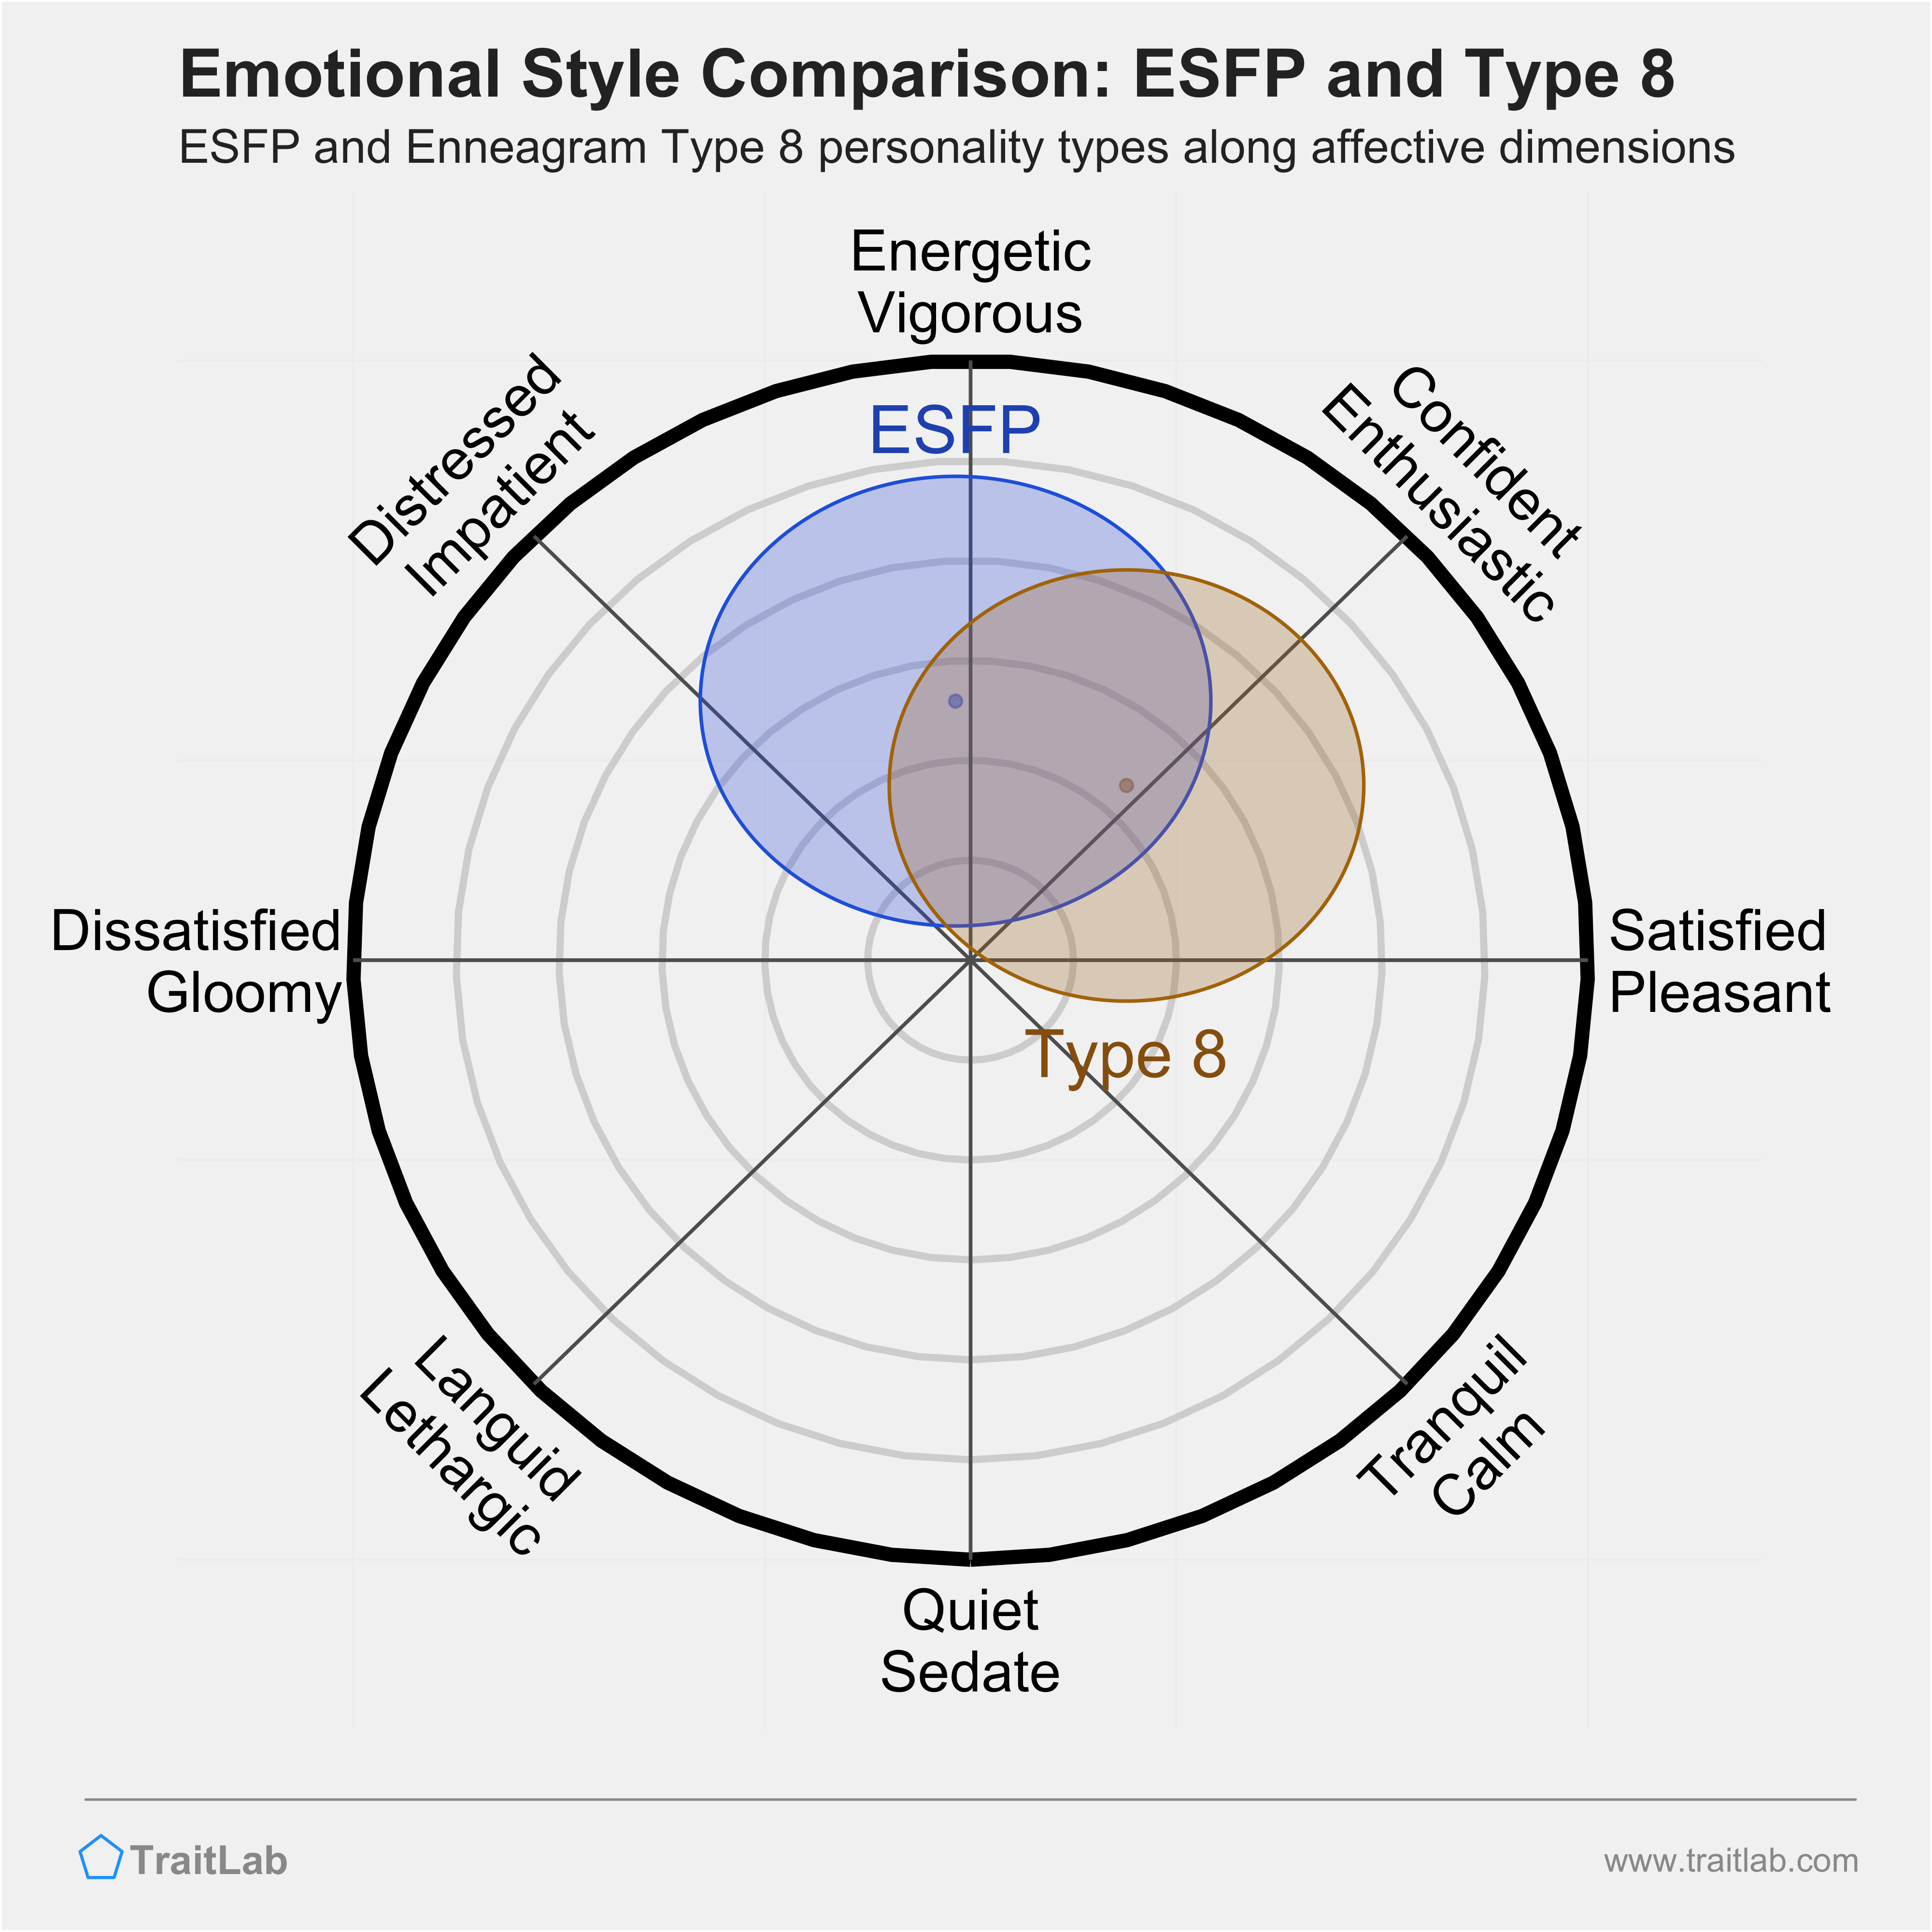 ESFP and Type 8 comparison across emotional (affective) dimensions